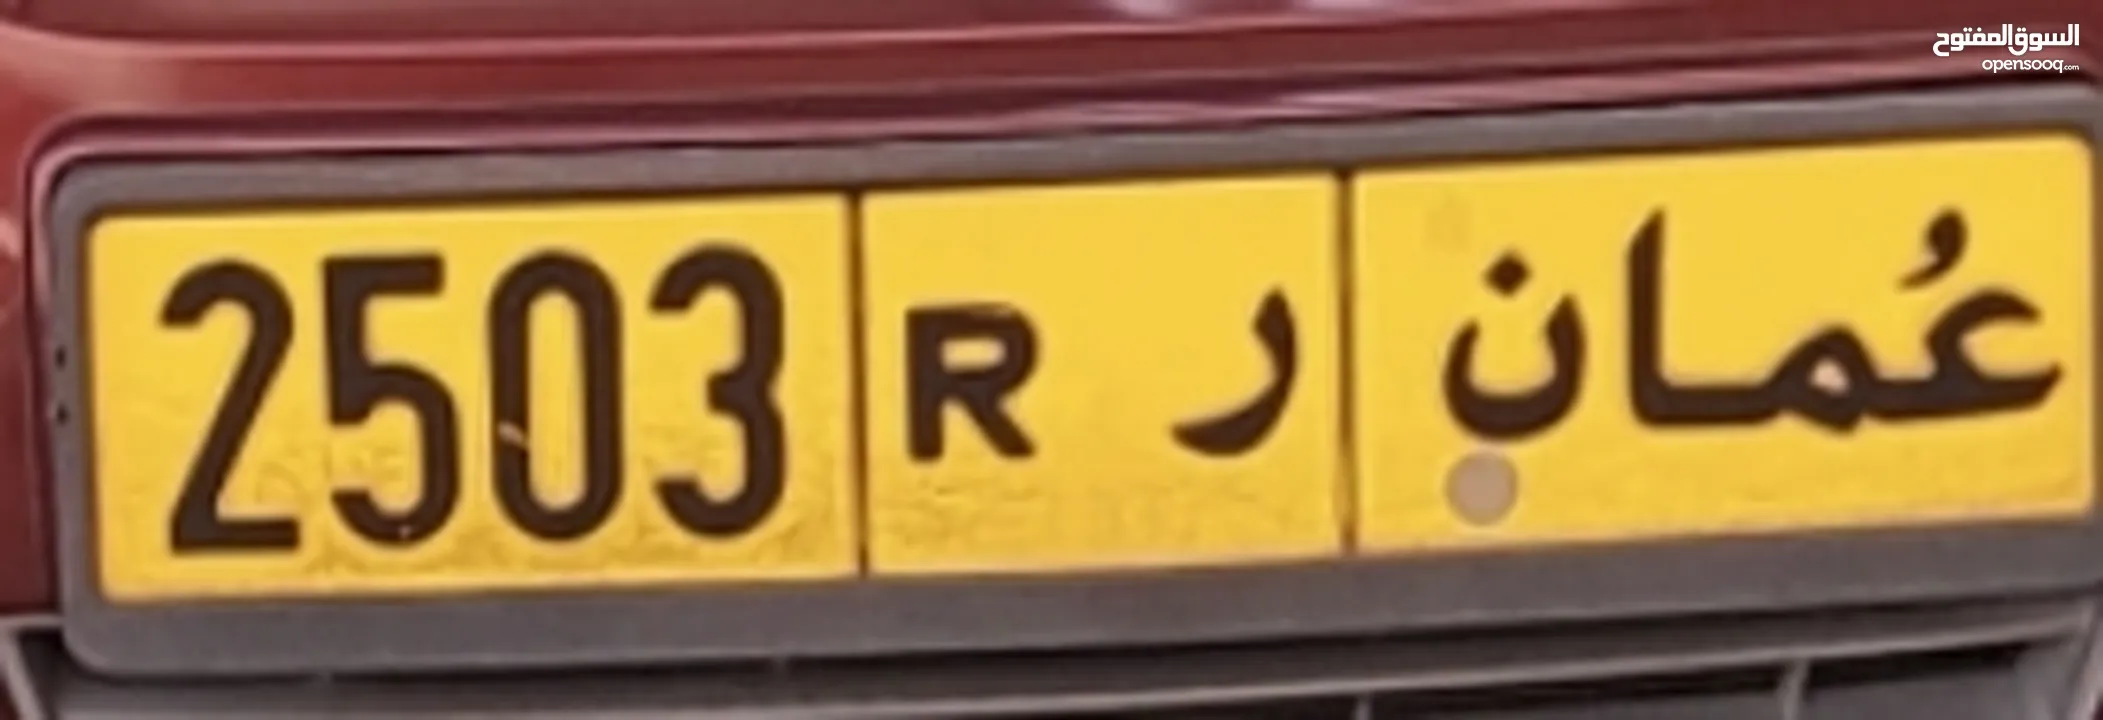 4 digits plate number